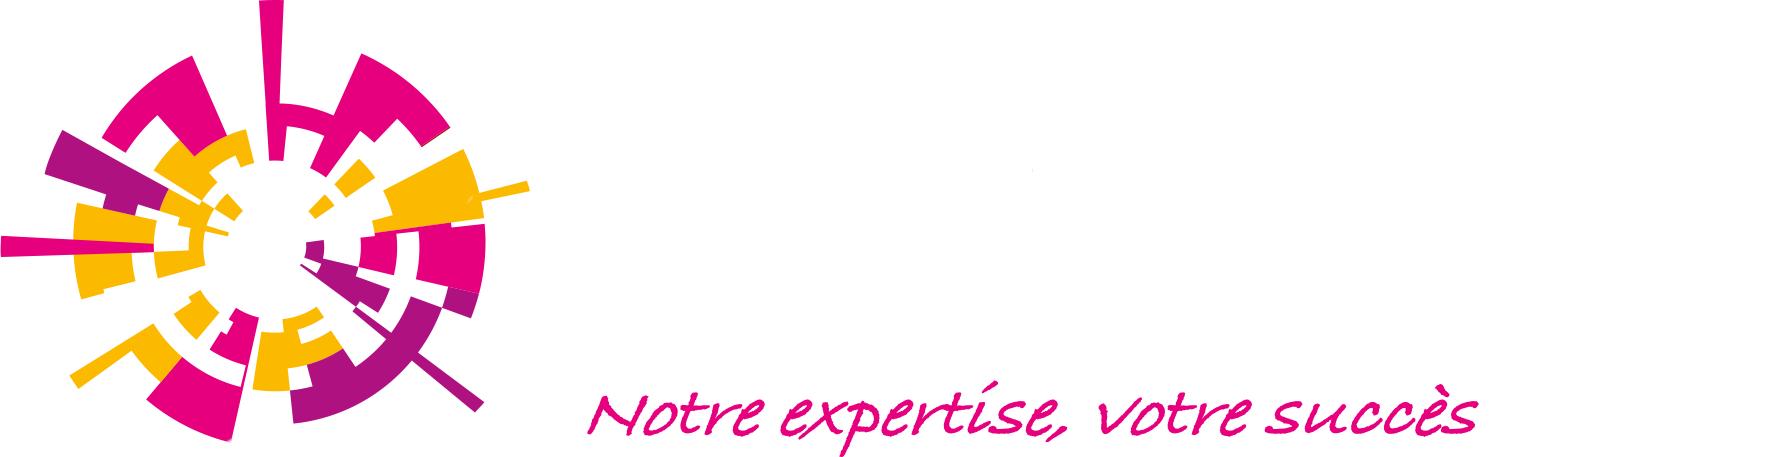 Technical Events